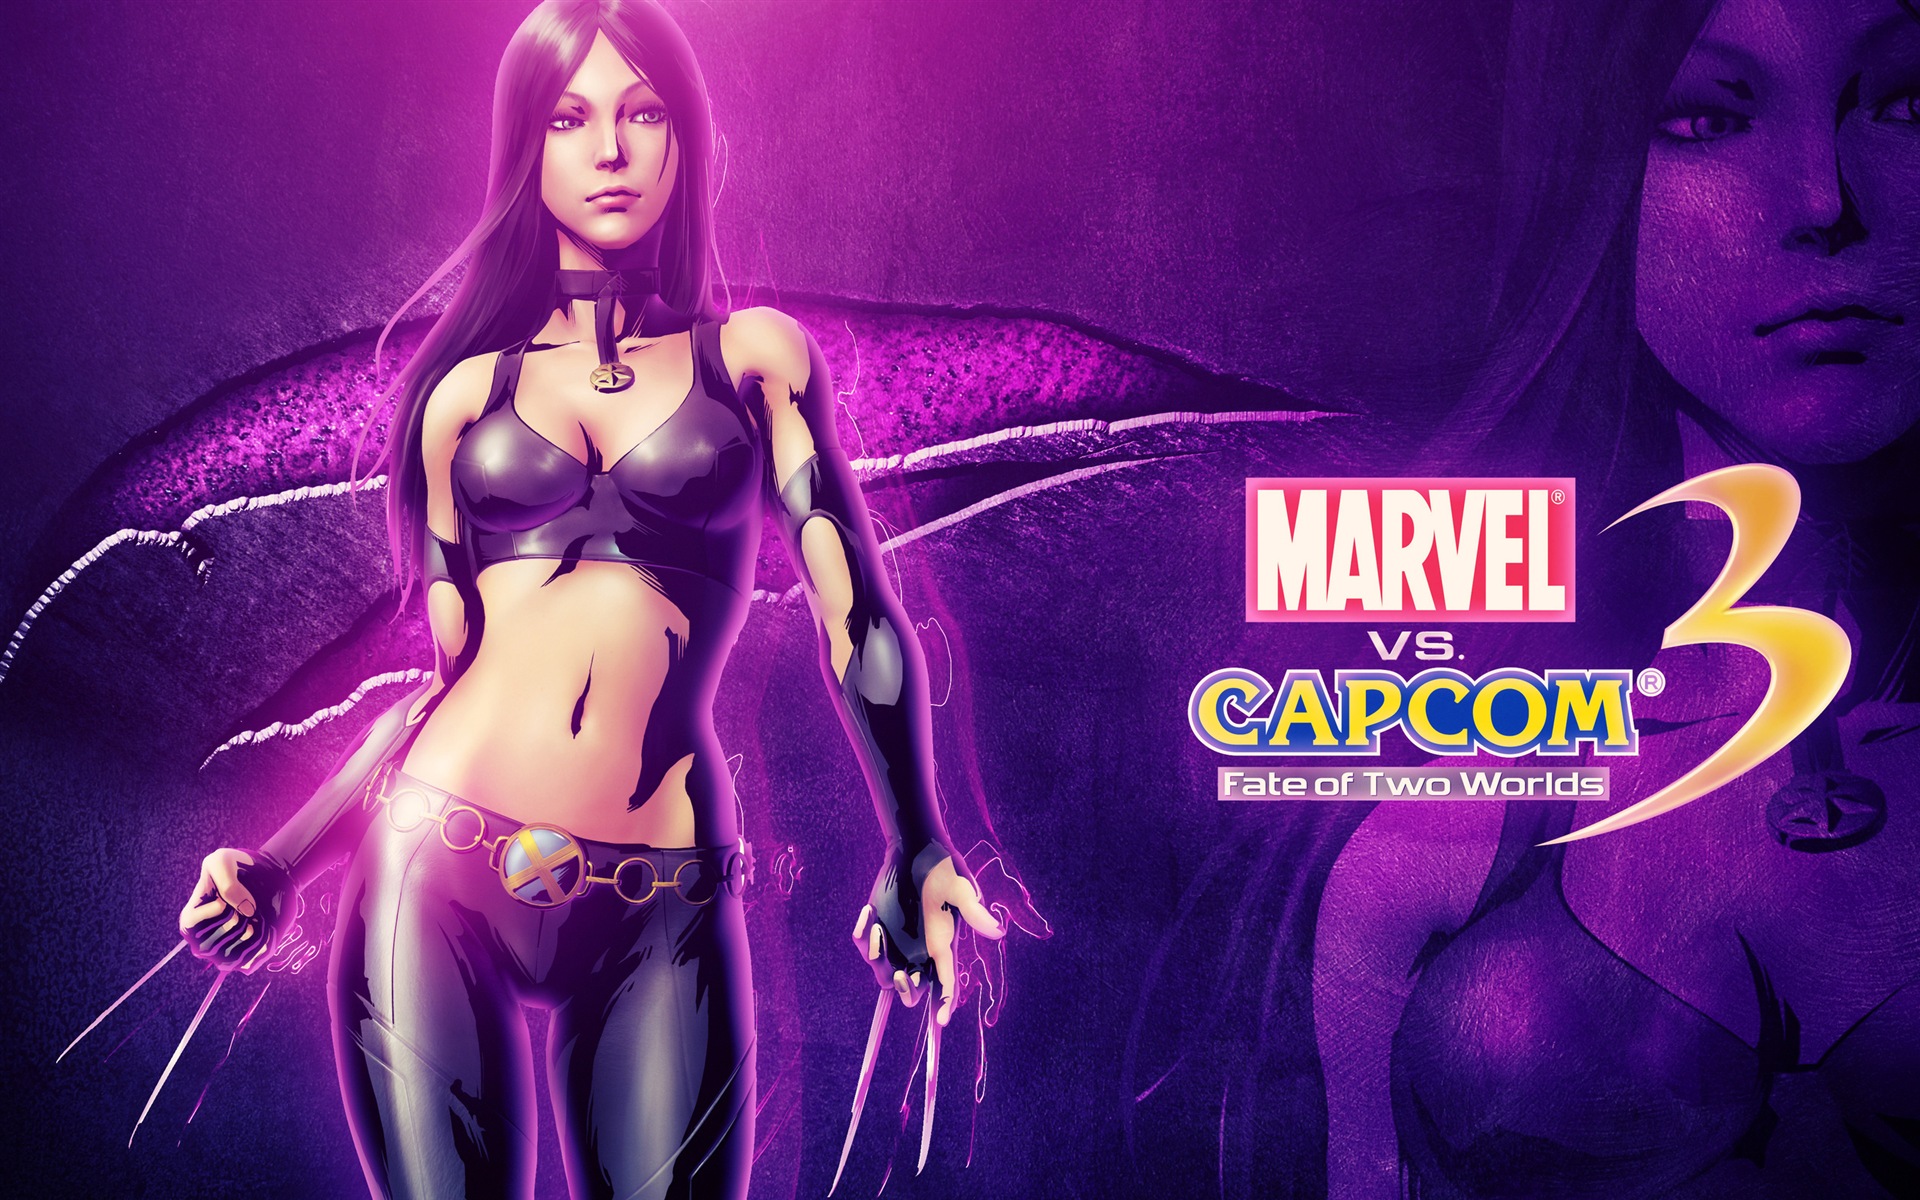 Marvel VS. Capcom 3: Fate of Two Worlds HD game wallpapers #10 - 1920x1200